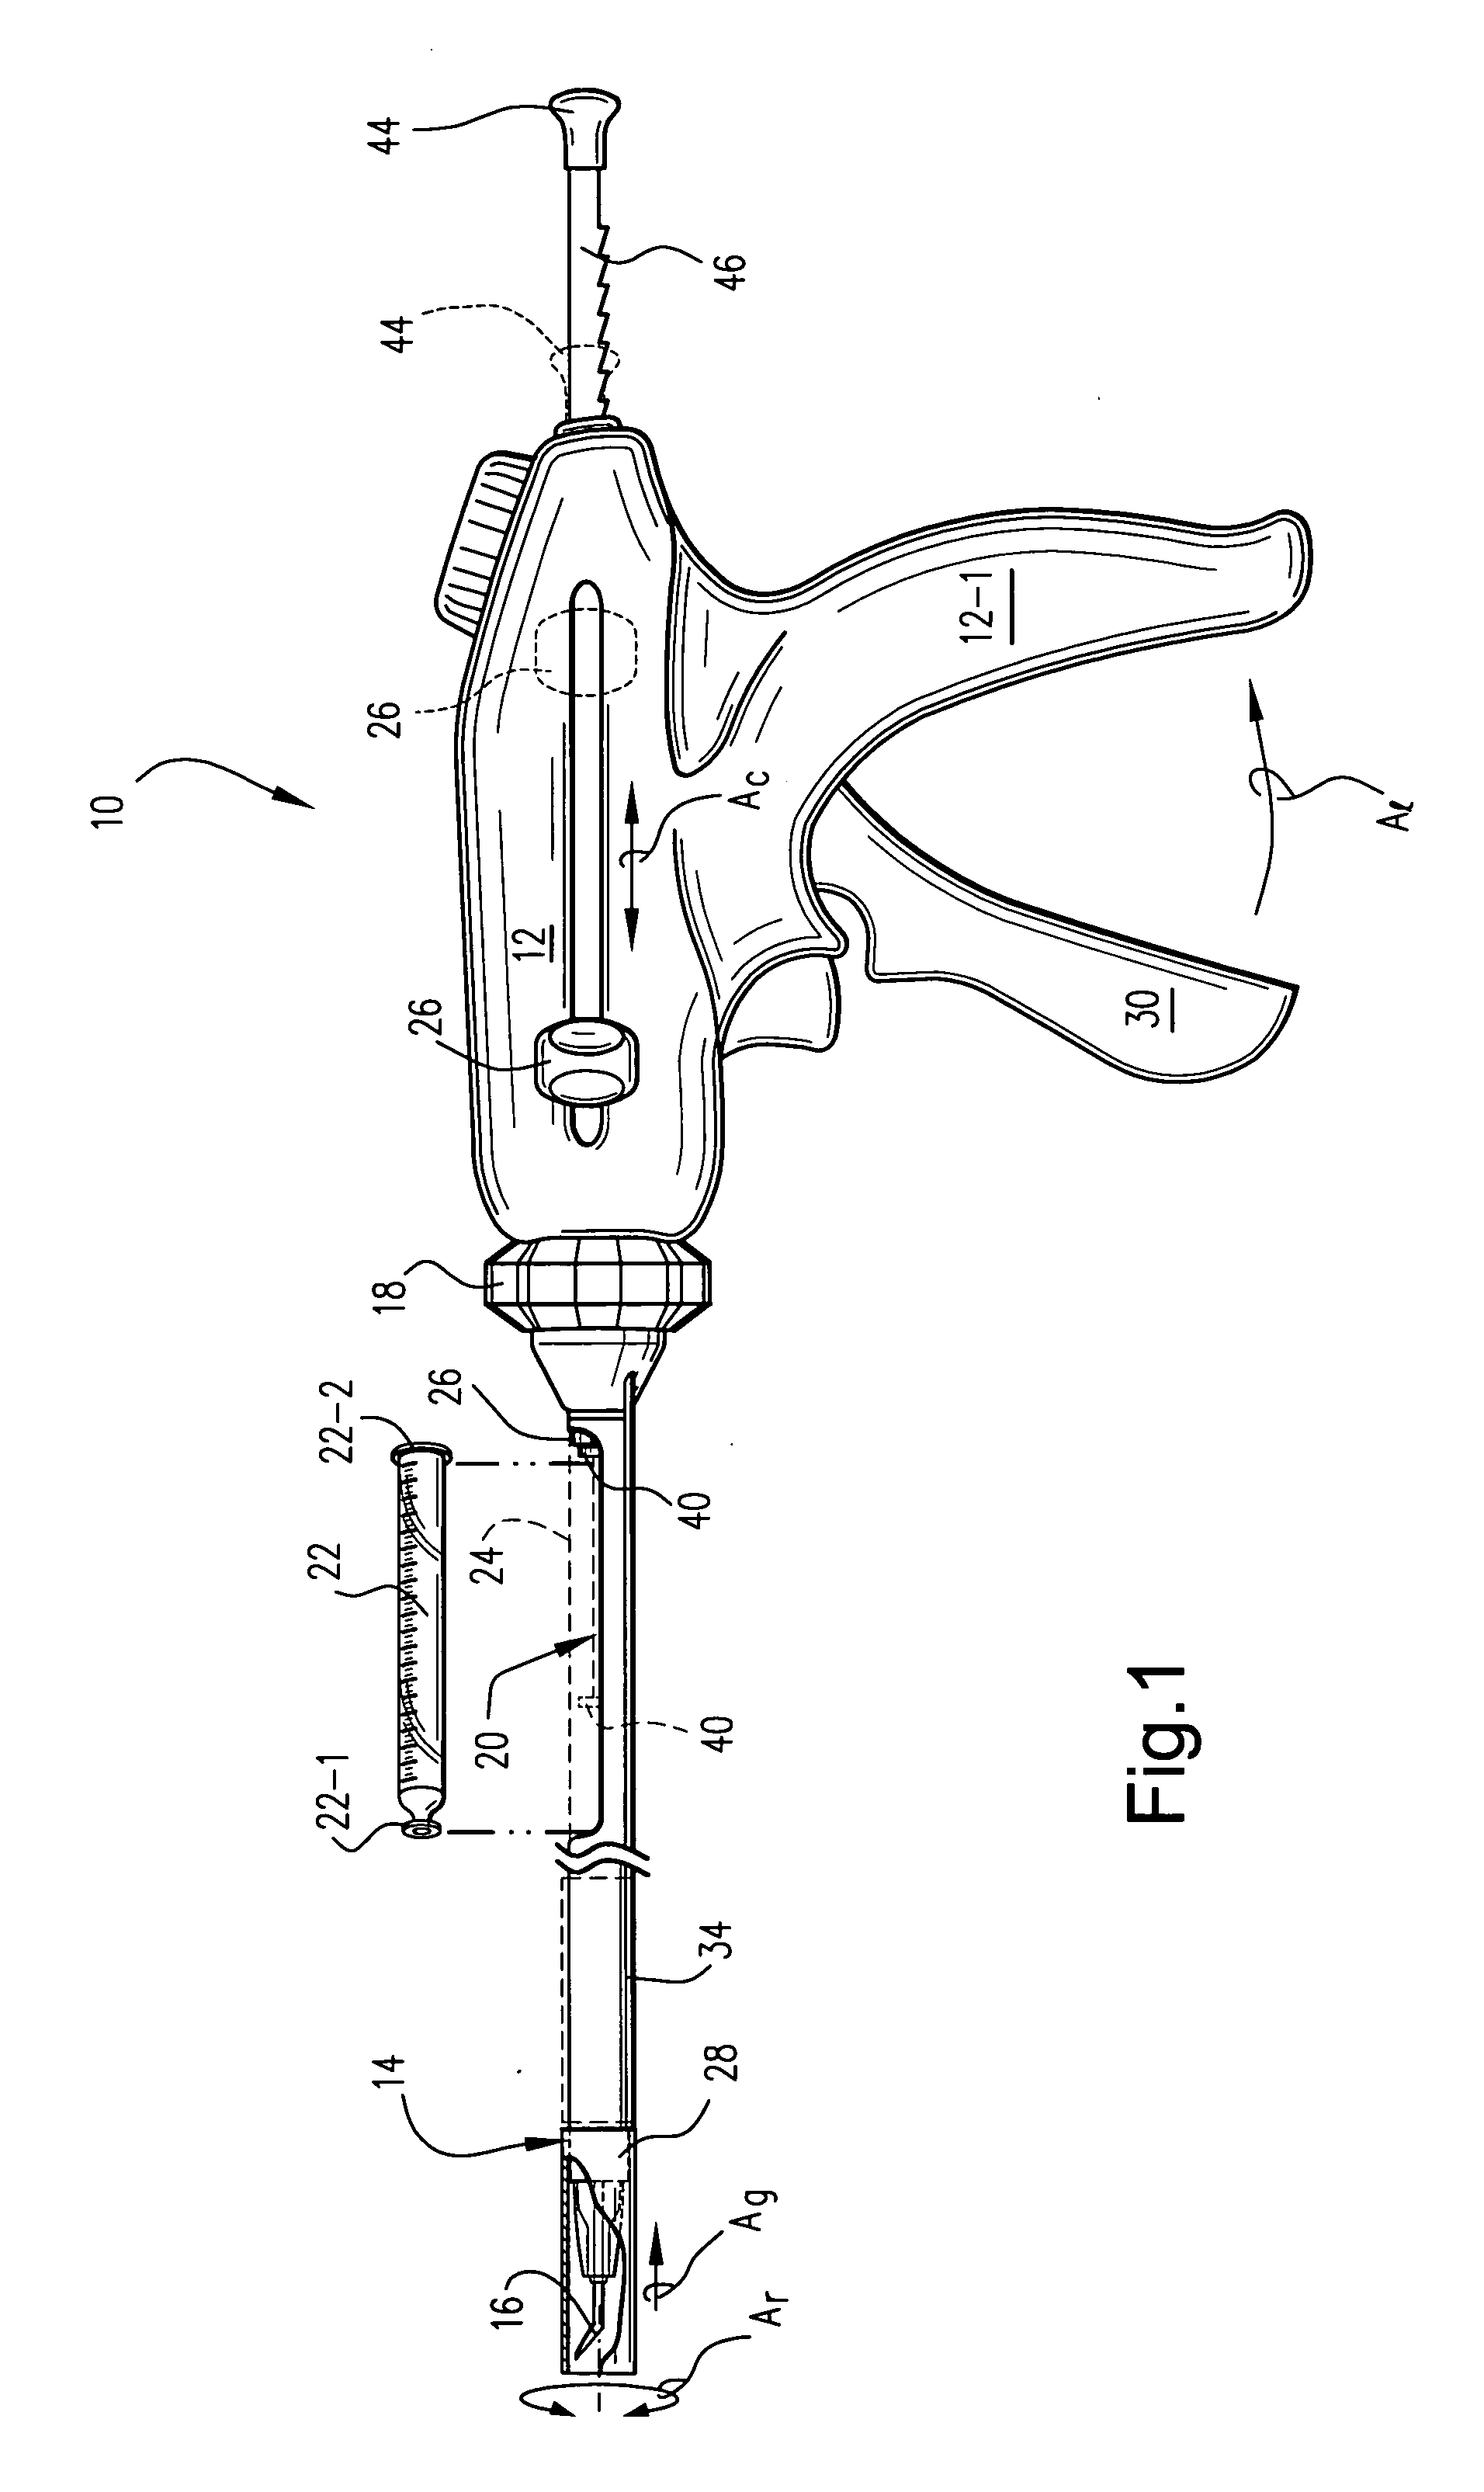 Minimally invasive injection devices and methods